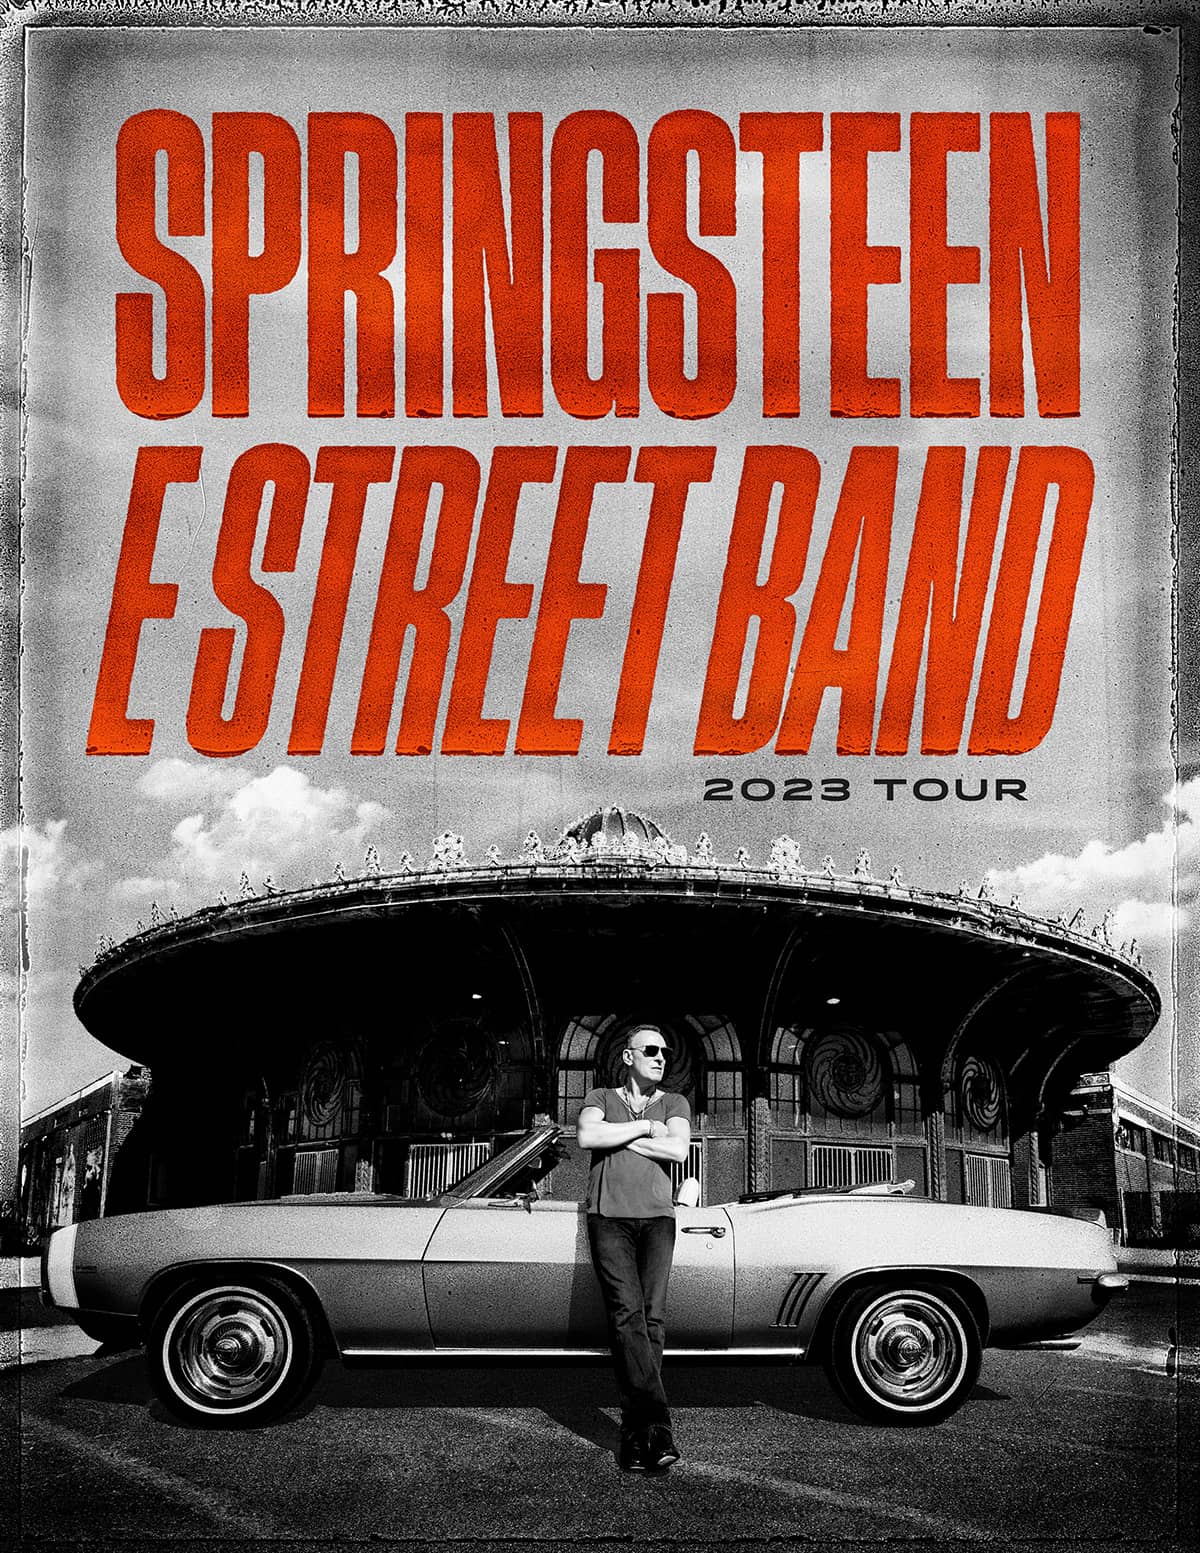 Springsteen and E Street Band 2023 Tour poster